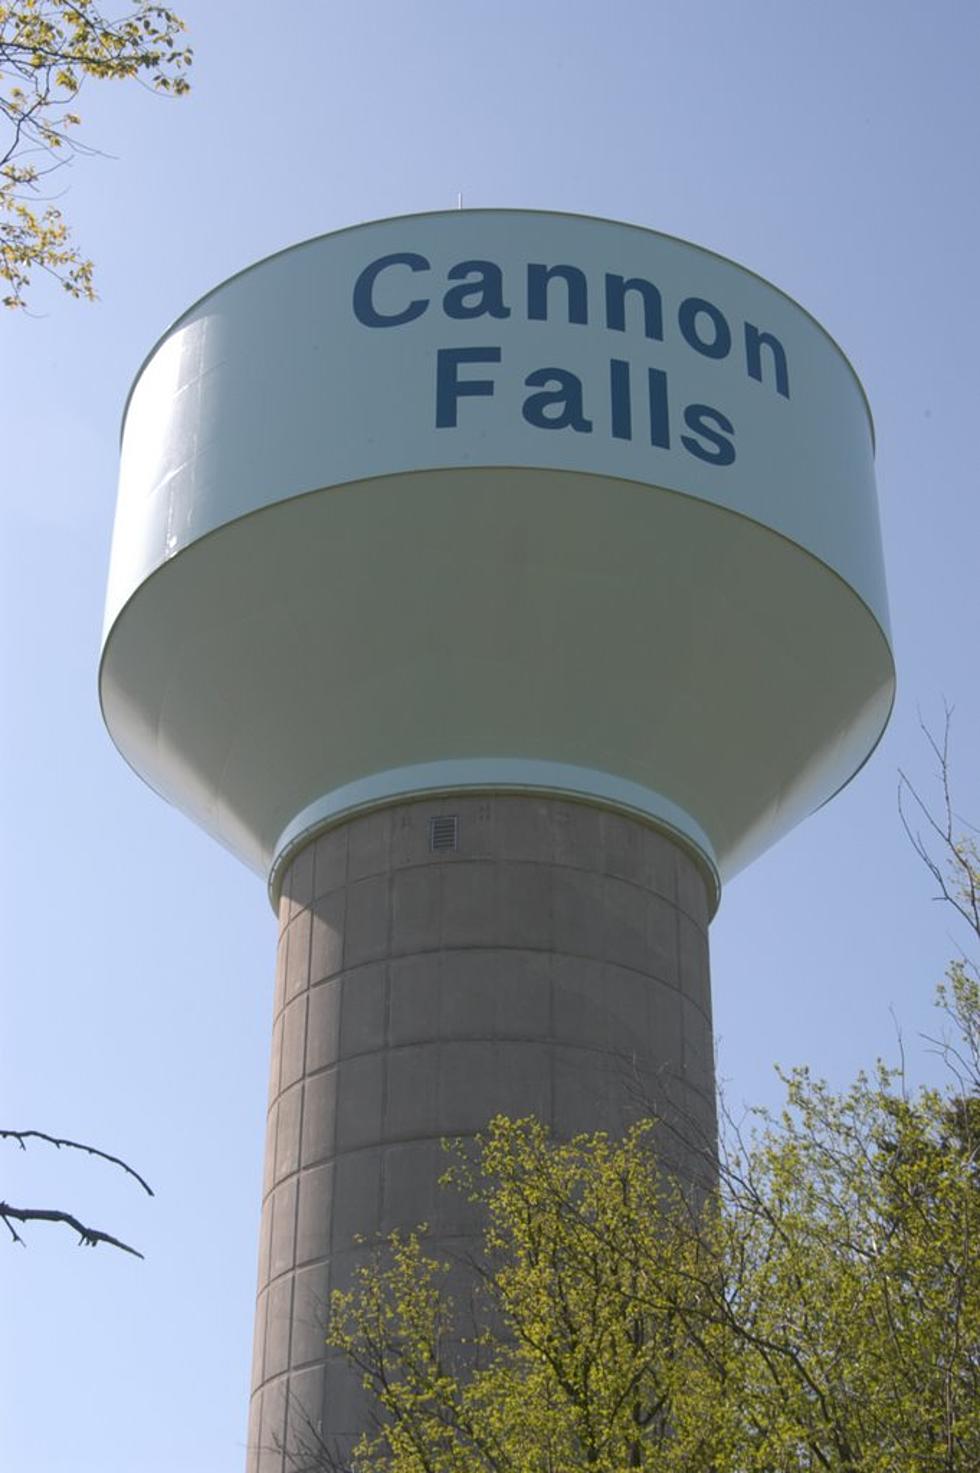 Cannon Falls Police Department Searching for Items Stolen from Construction Site